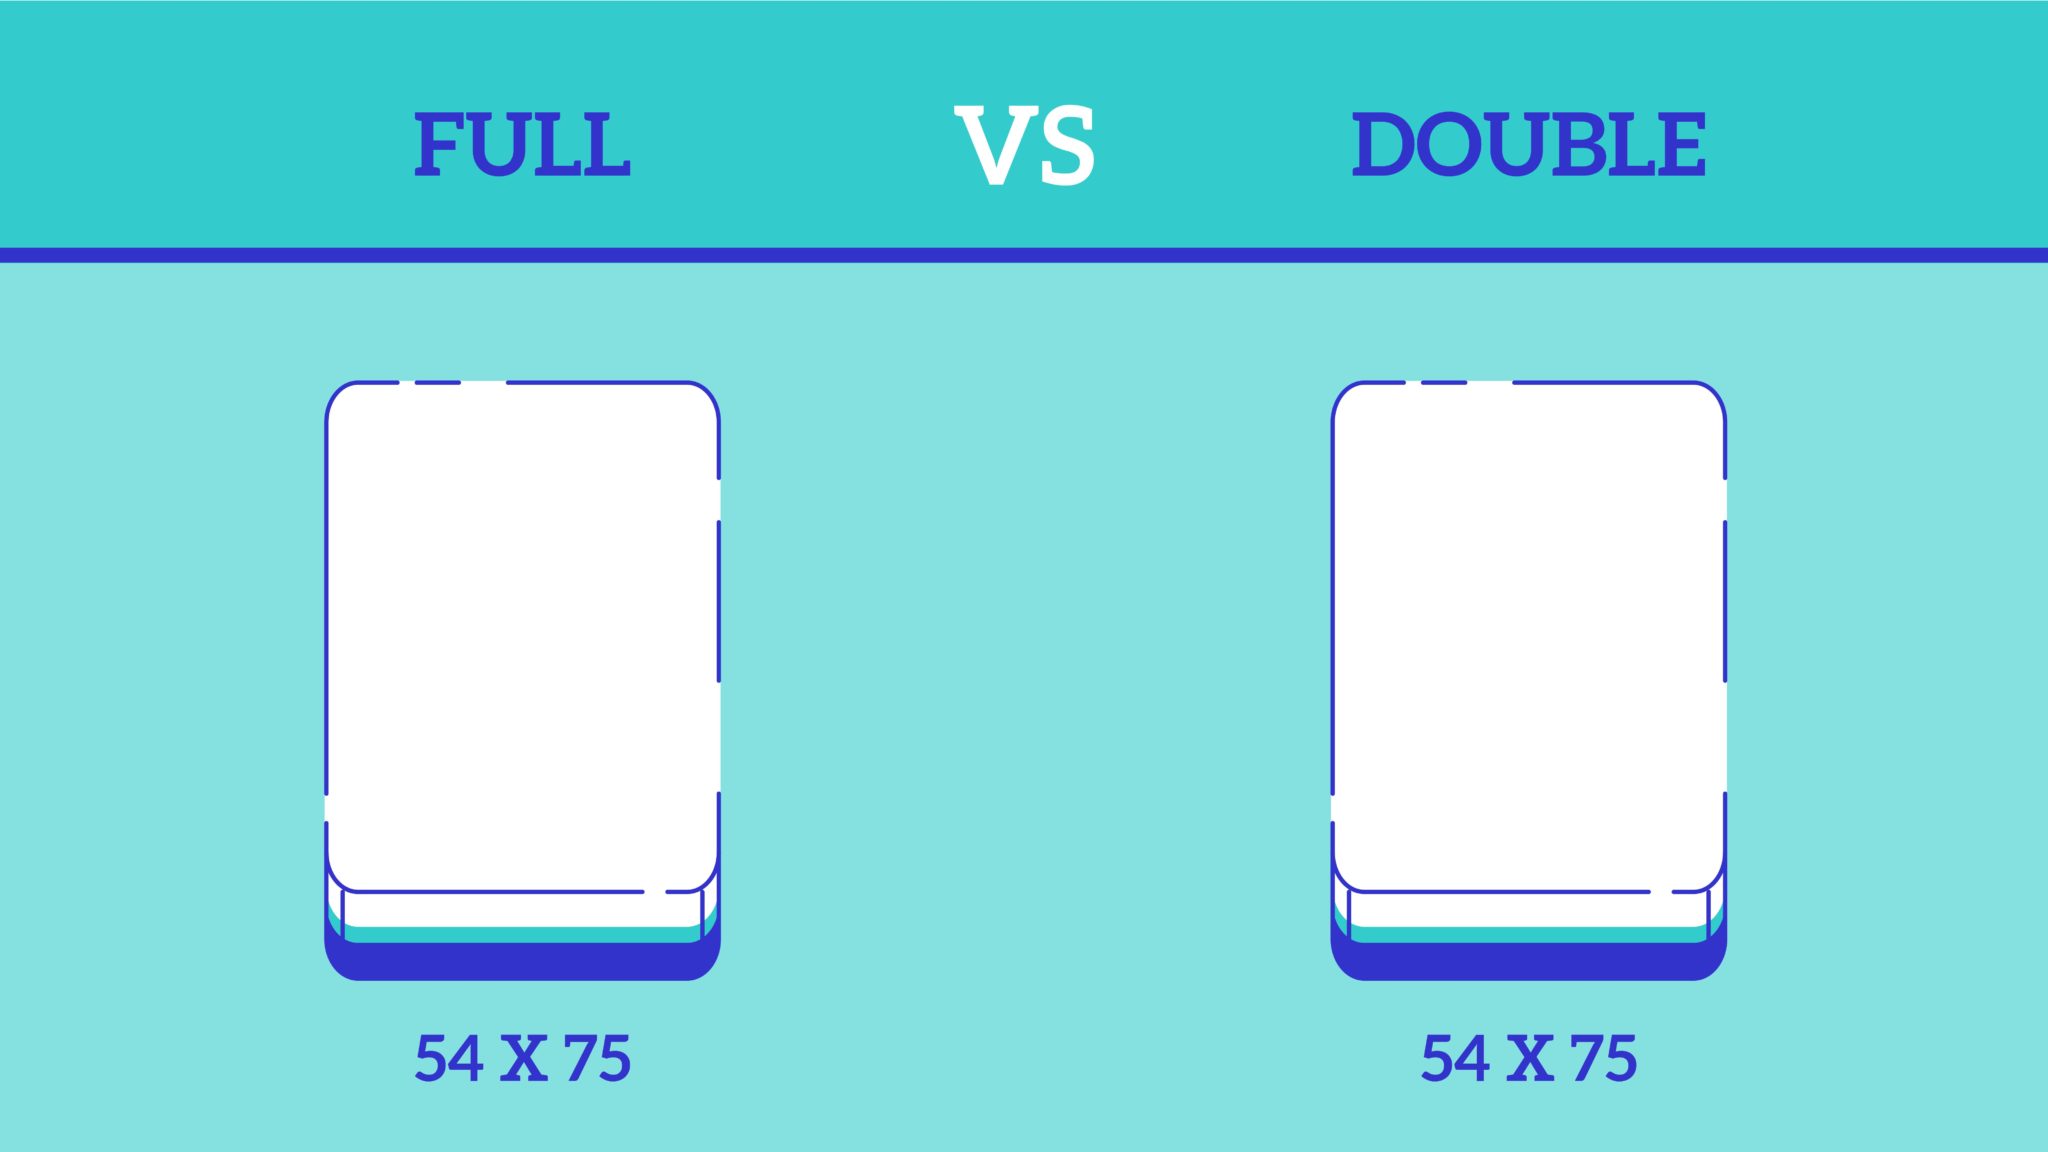 differnece between full and double mattress